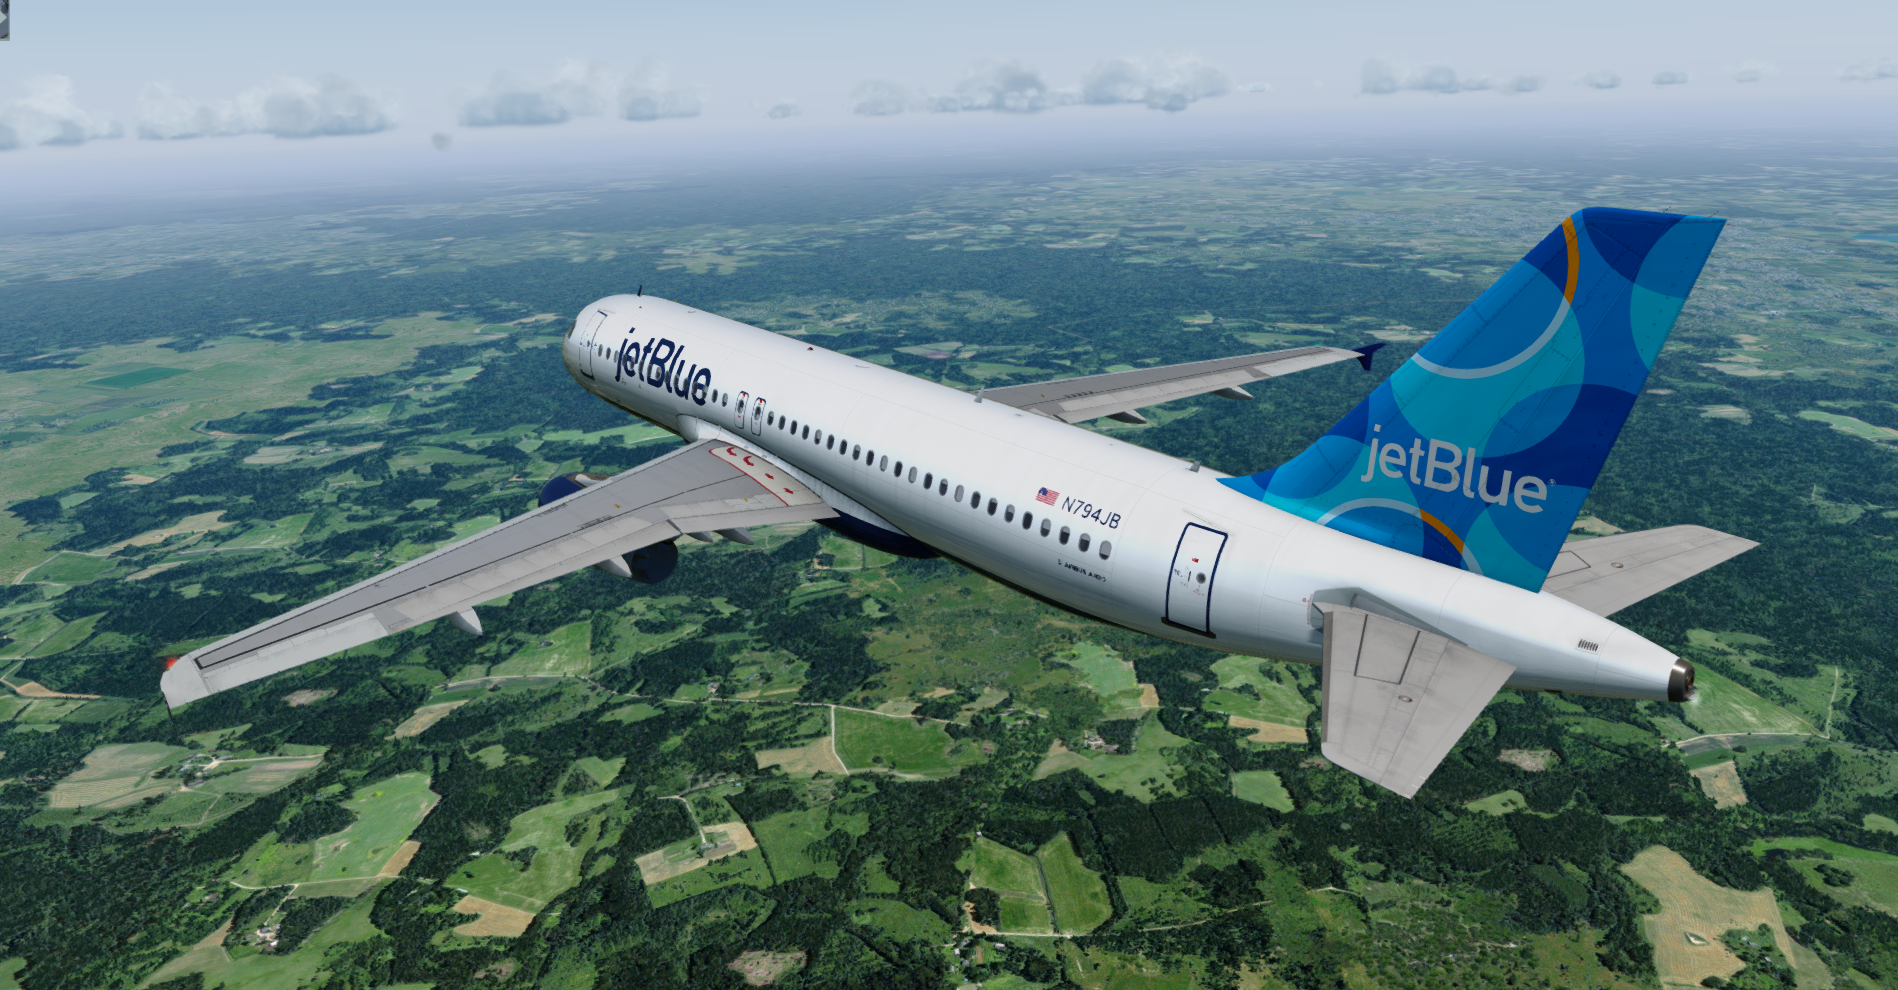 More information about "[4K] JetBlue Airways N794JB Spotlight Tail Airbus A320 IAE"